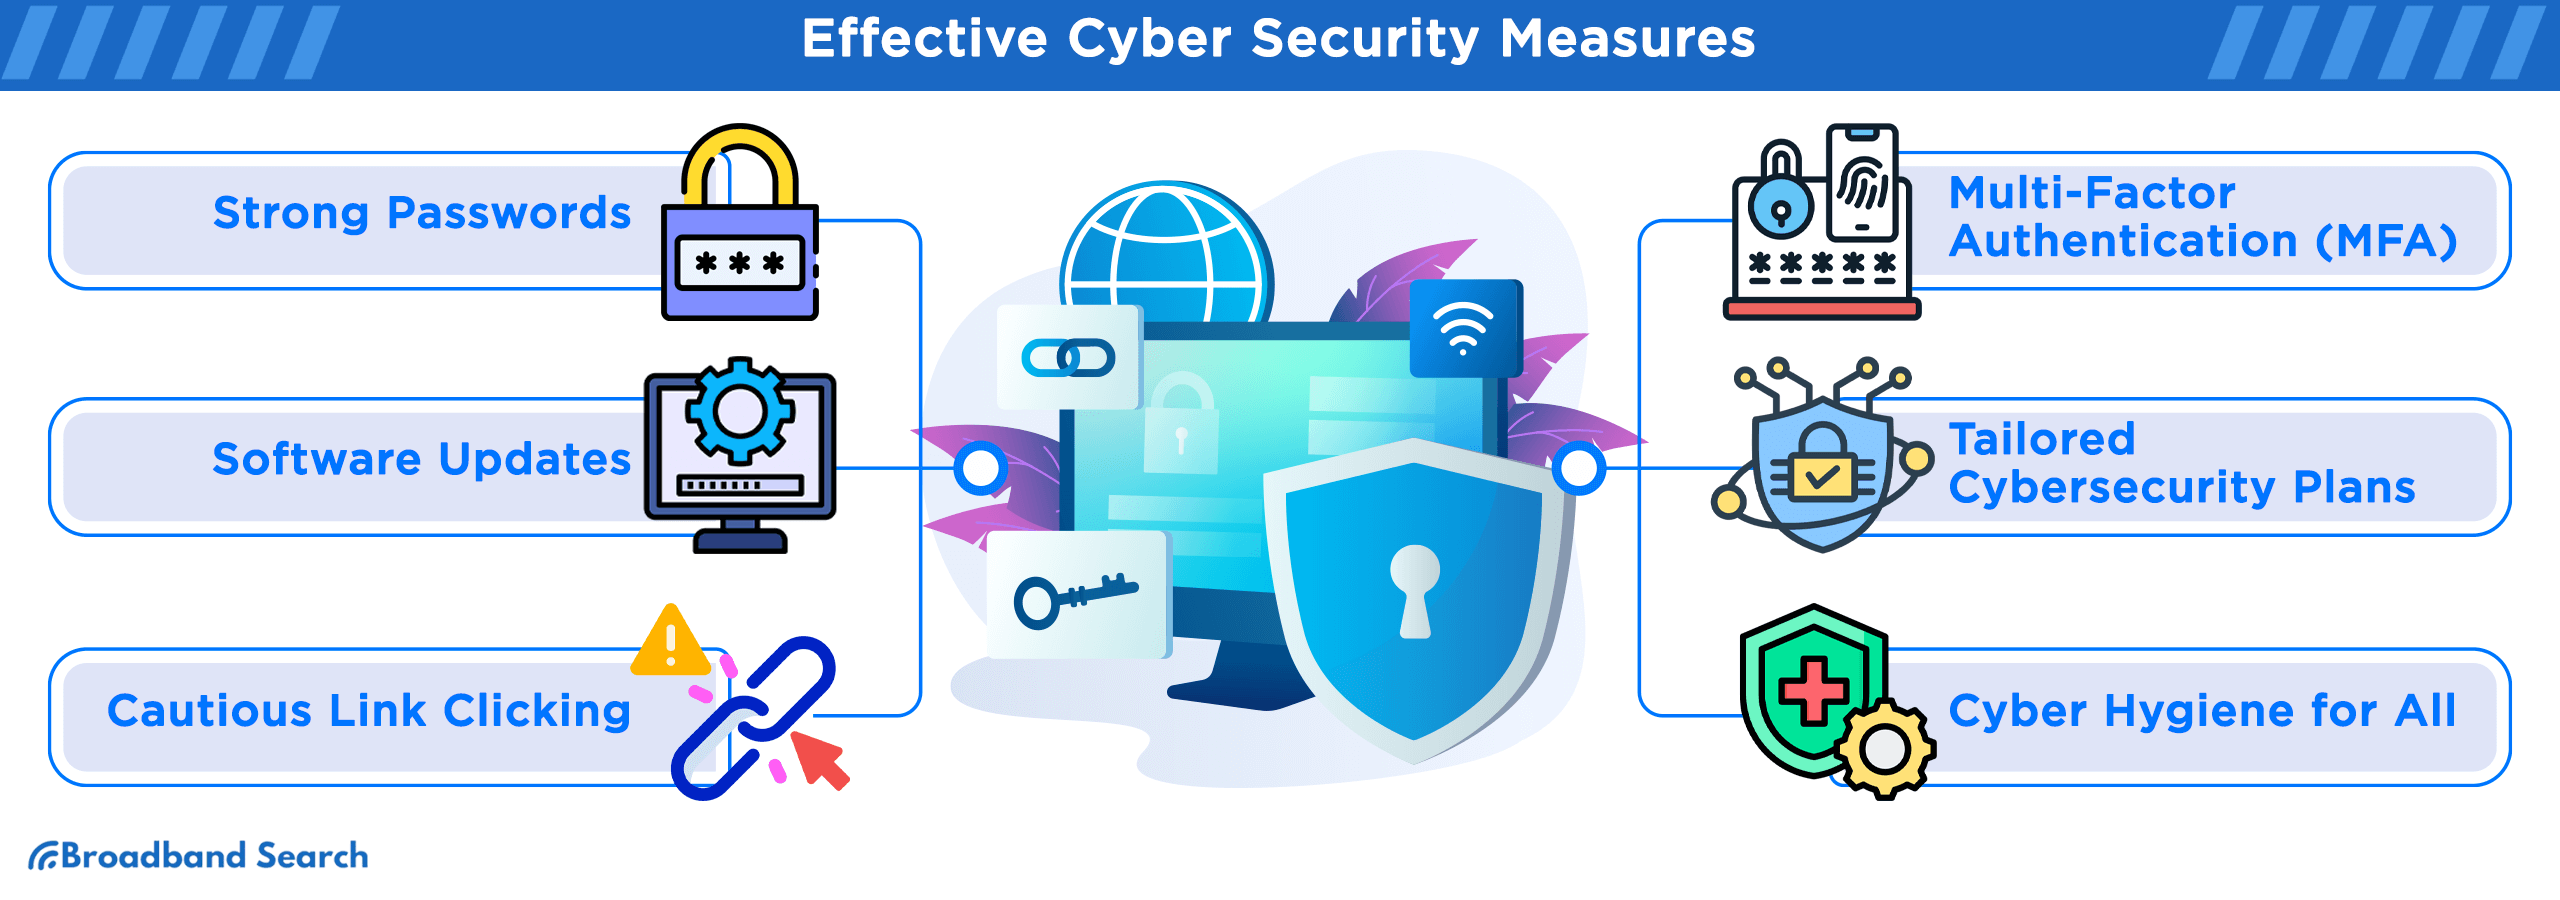 List of Effective cyber security measures